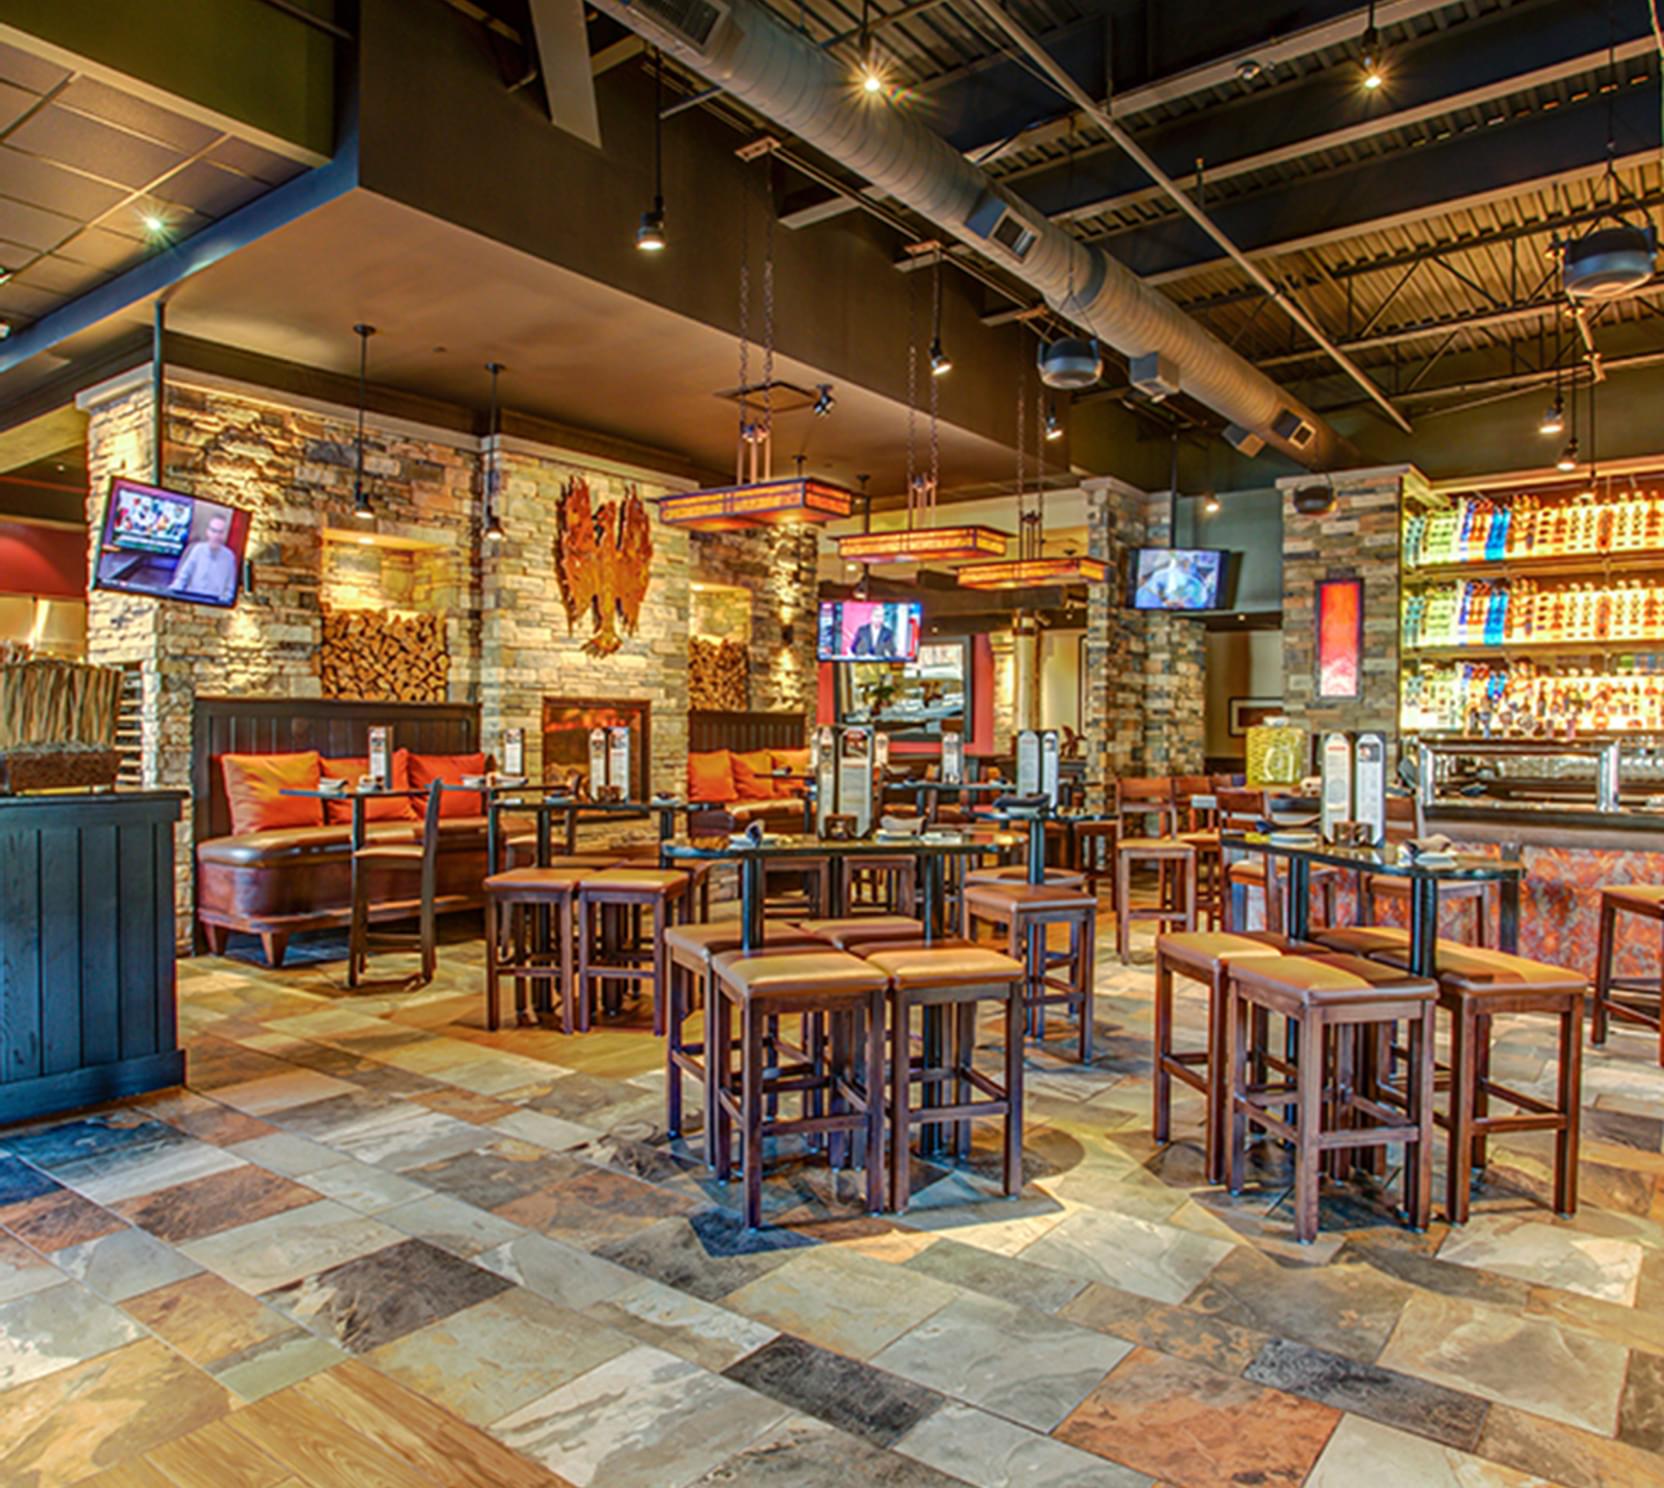 Interior of Firebirds Wood Fired Grill in Brentwood, TN